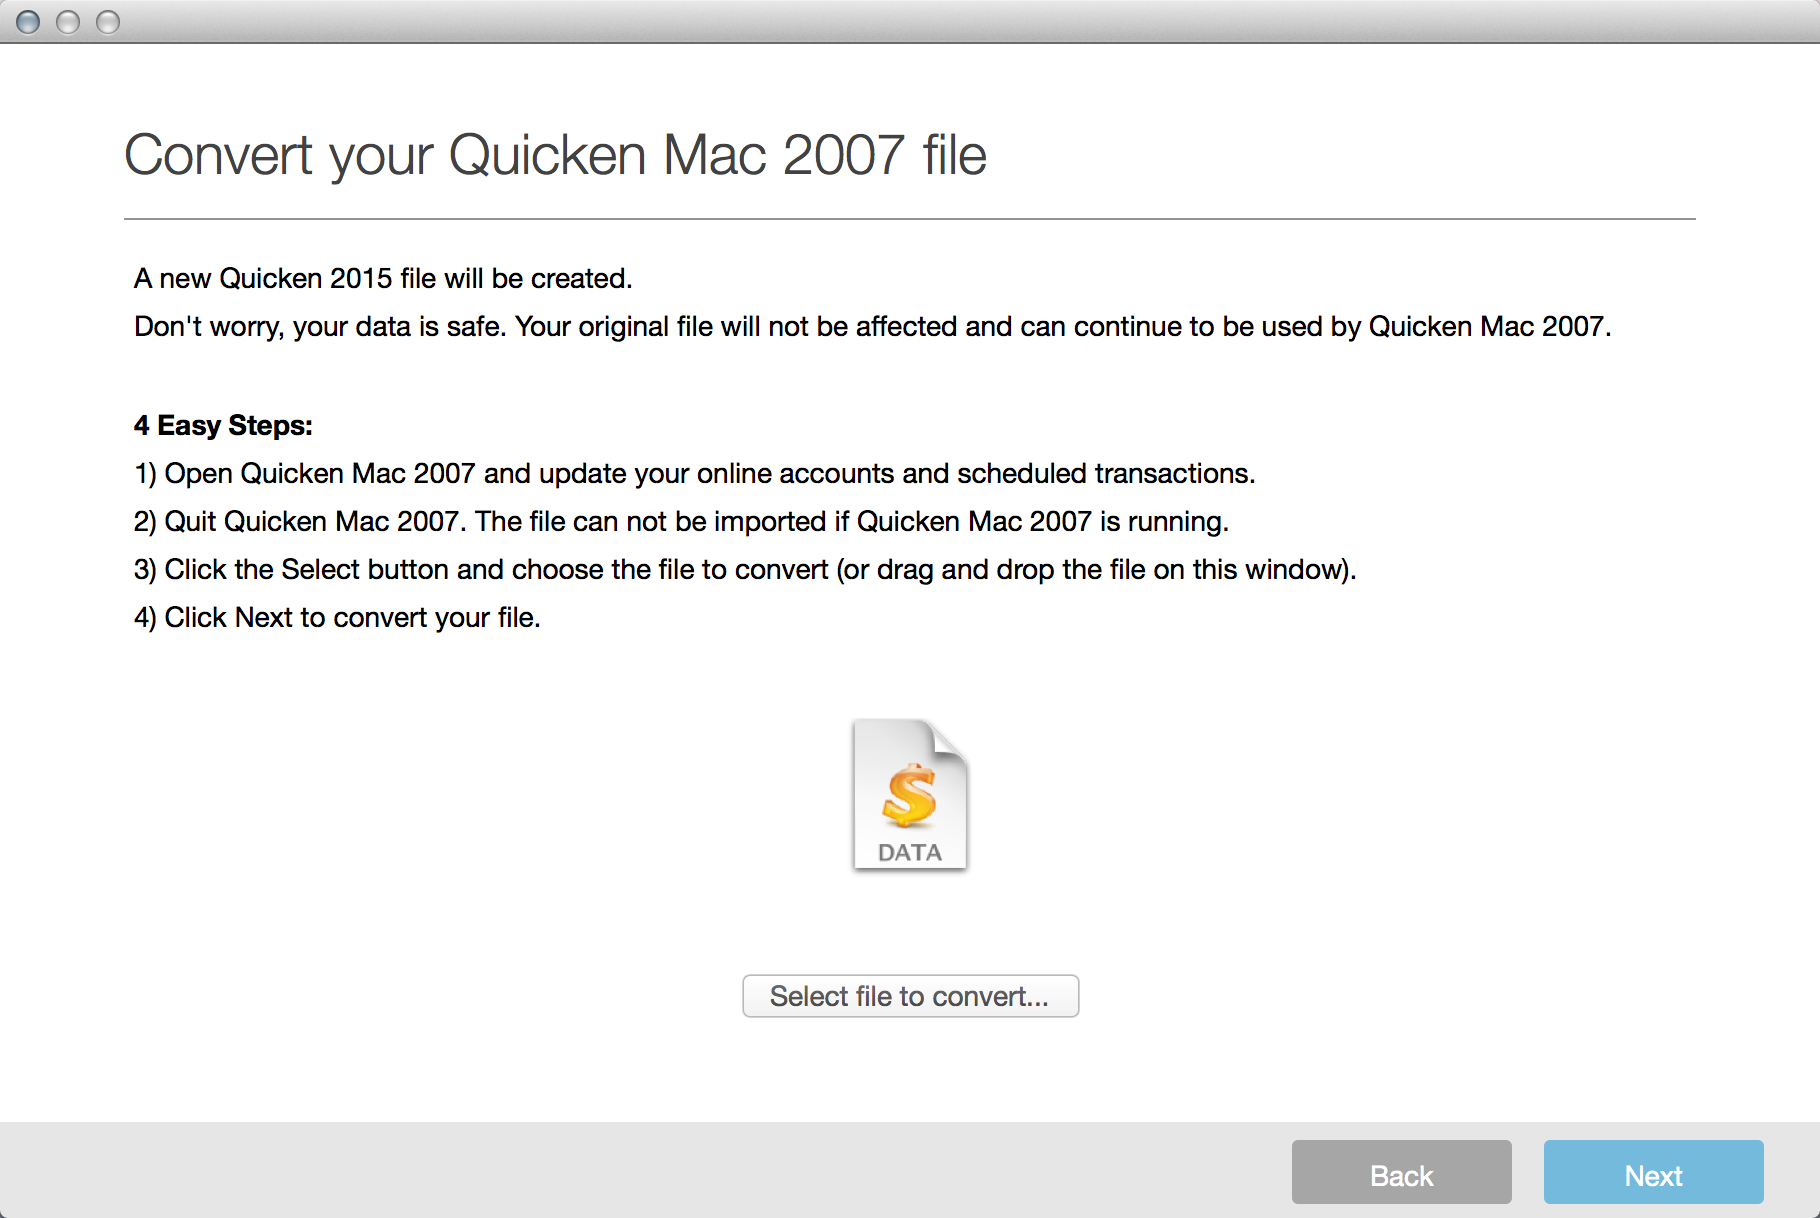 Converting Your Data (Quicken for Mac)